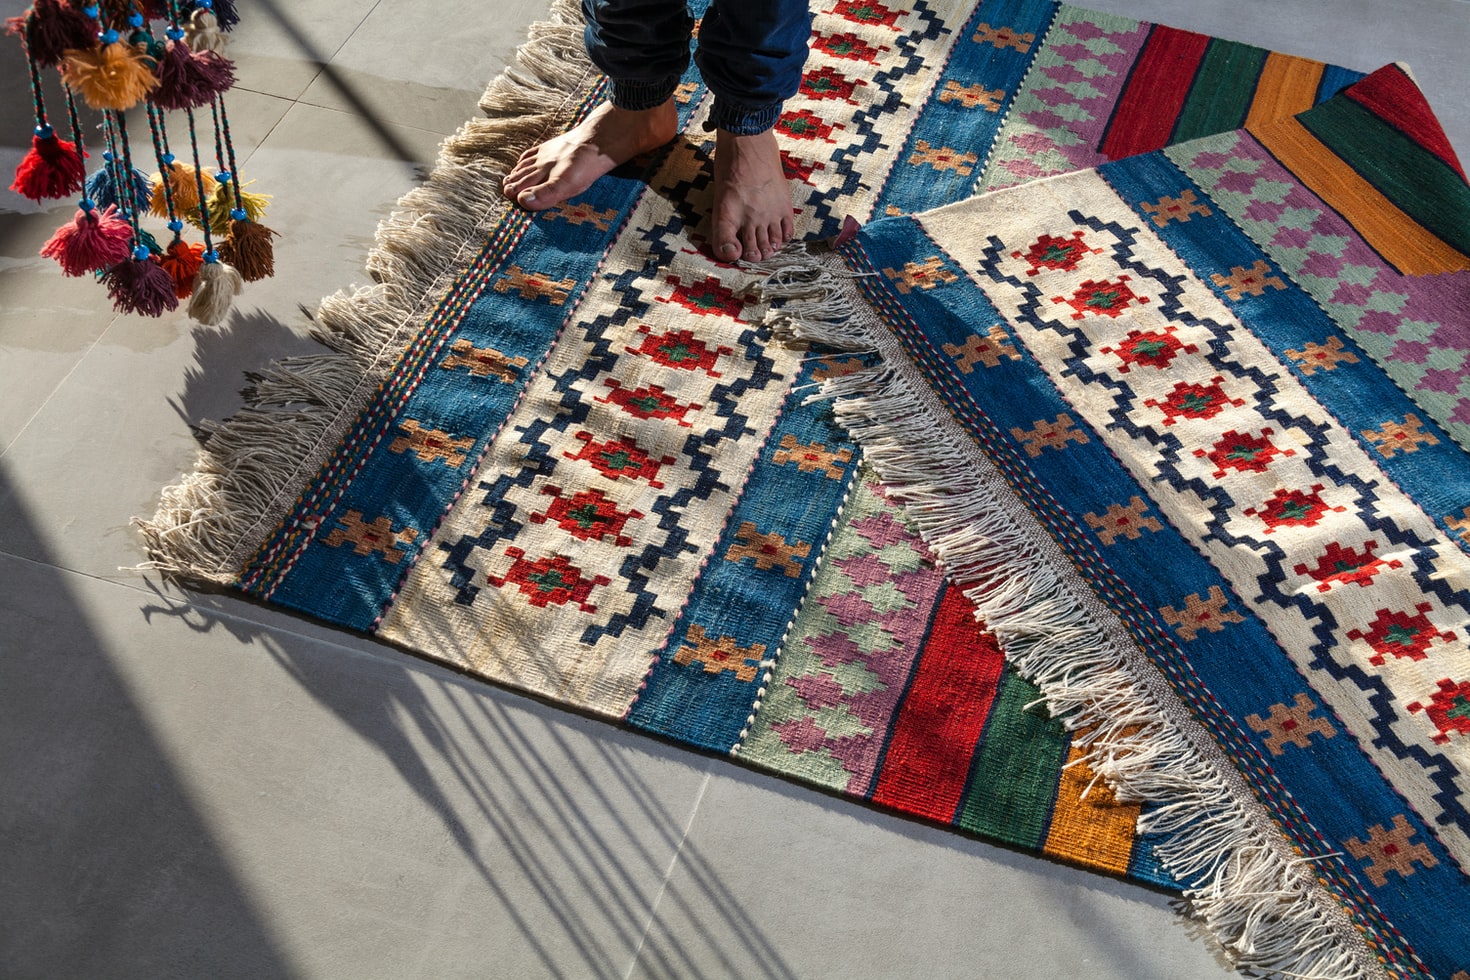 Buying Carpets: A Step-By-Step Guide